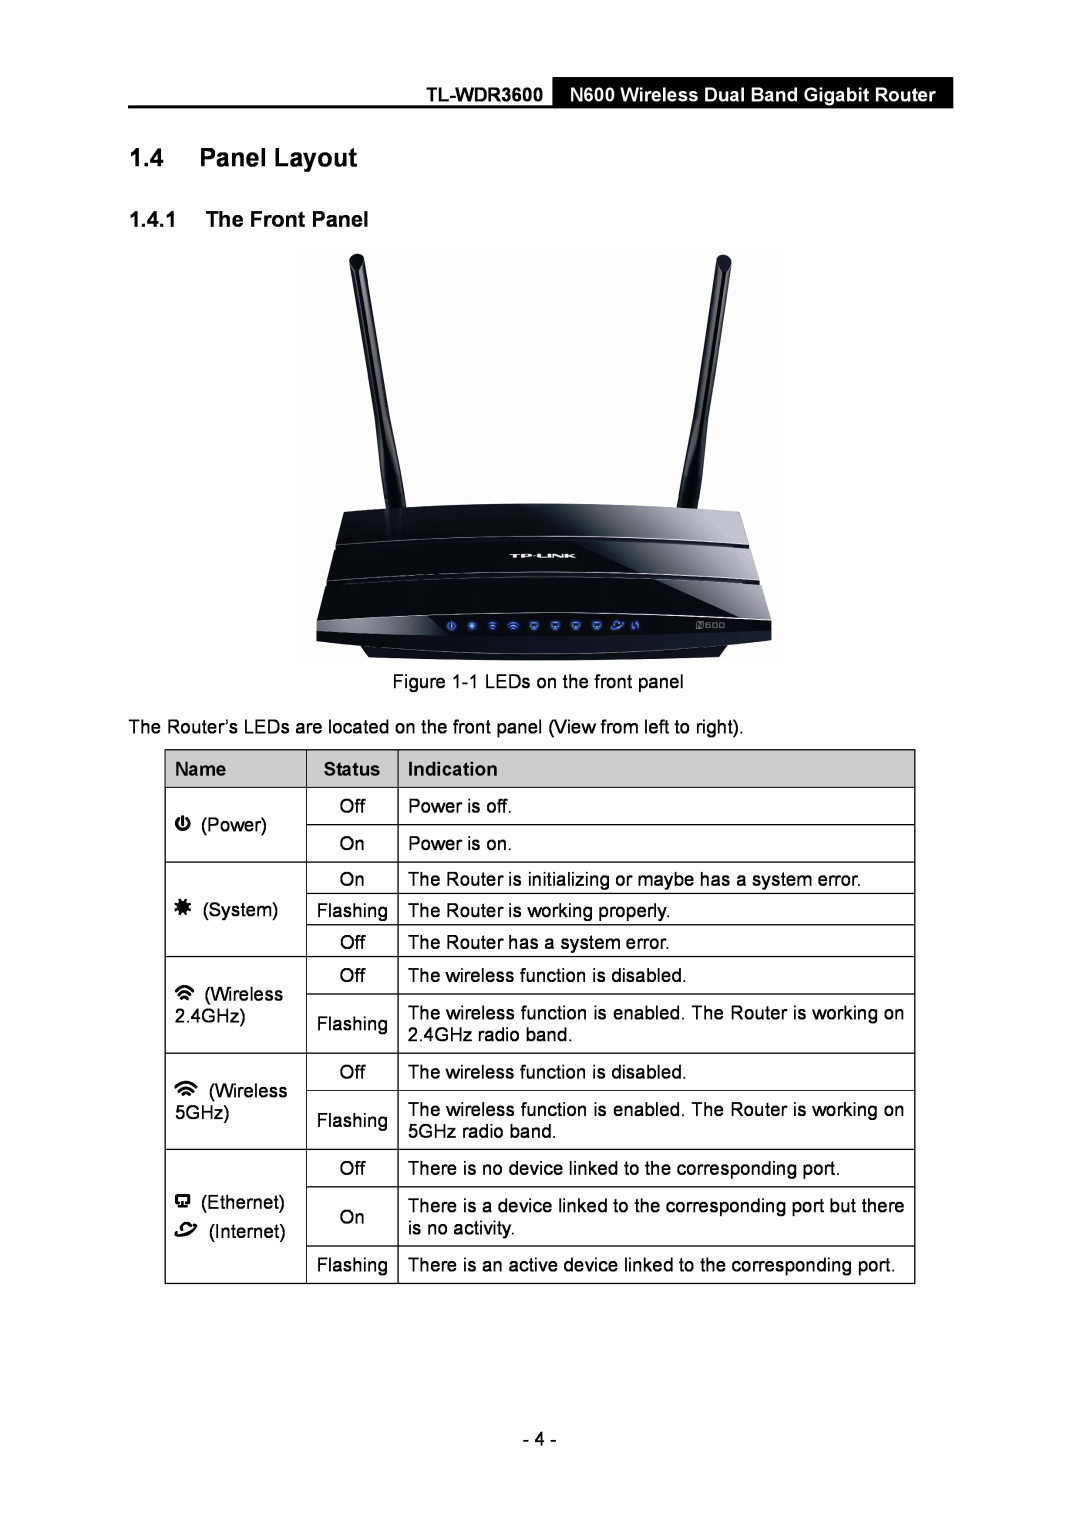 TP-Link manual Panel Layout, The Front Panel, Name, Indication, TL-WDR3600 N600 Wireless Dual Band Gigabit Router 